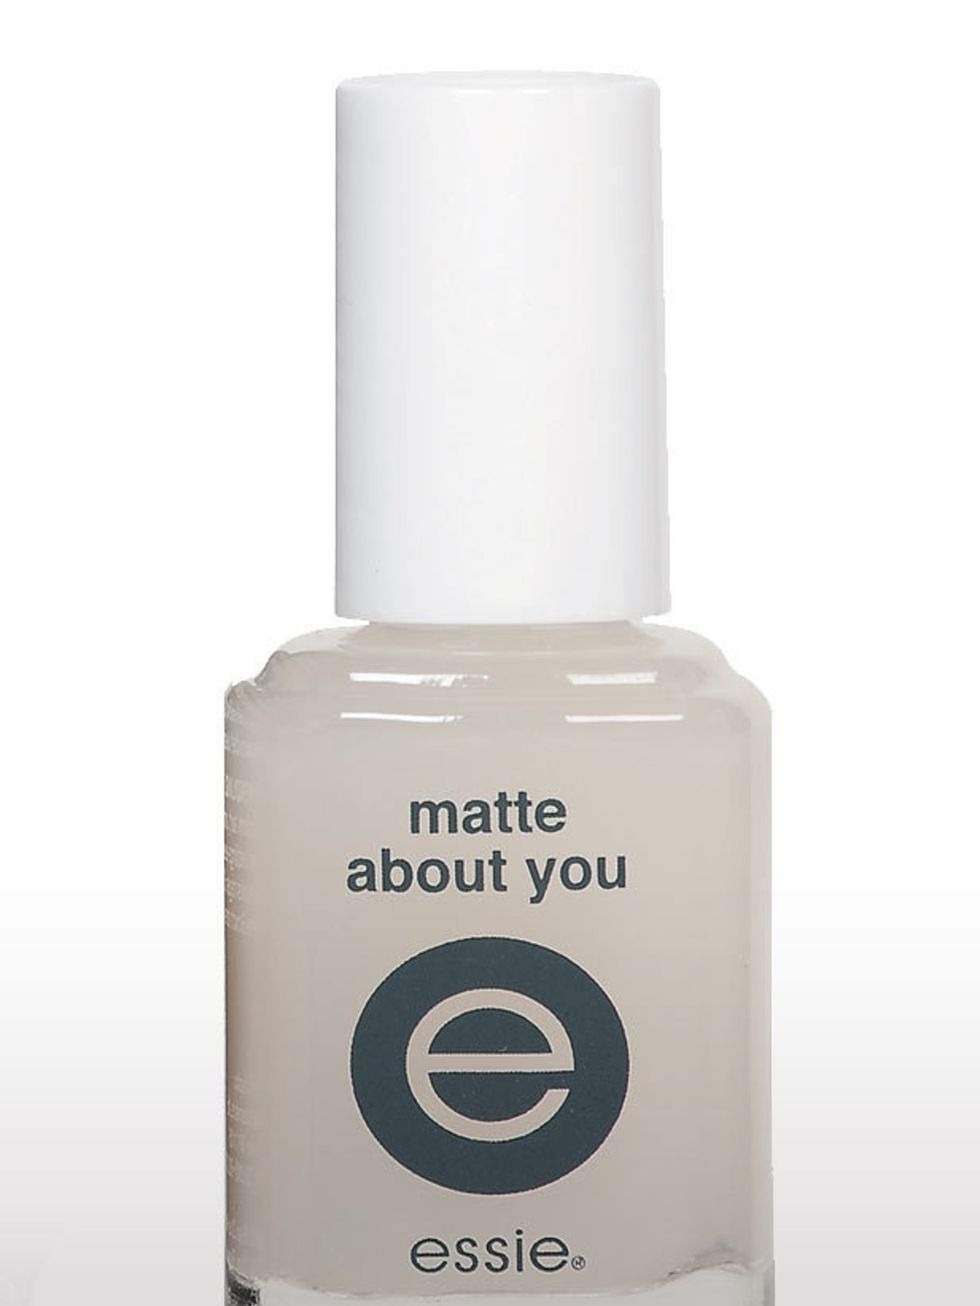 <p>Top Coat in Matte About You, £8.95 by <a href="http://www.nailsbymail.co.uk/store/home/matte-about-you-">Essie</a></p>